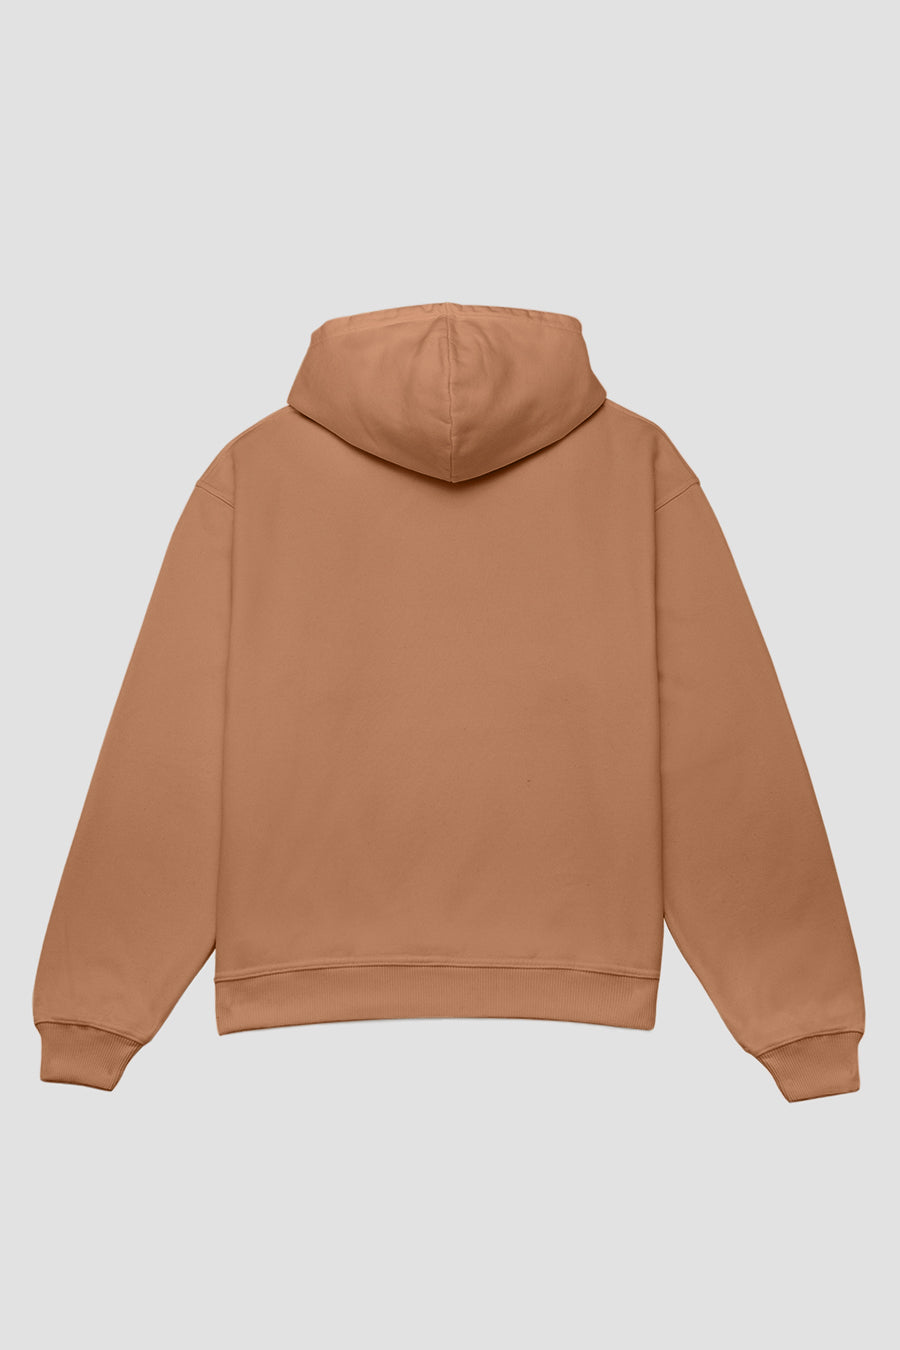 Hazel Brown Hoodie - only available in wholesale